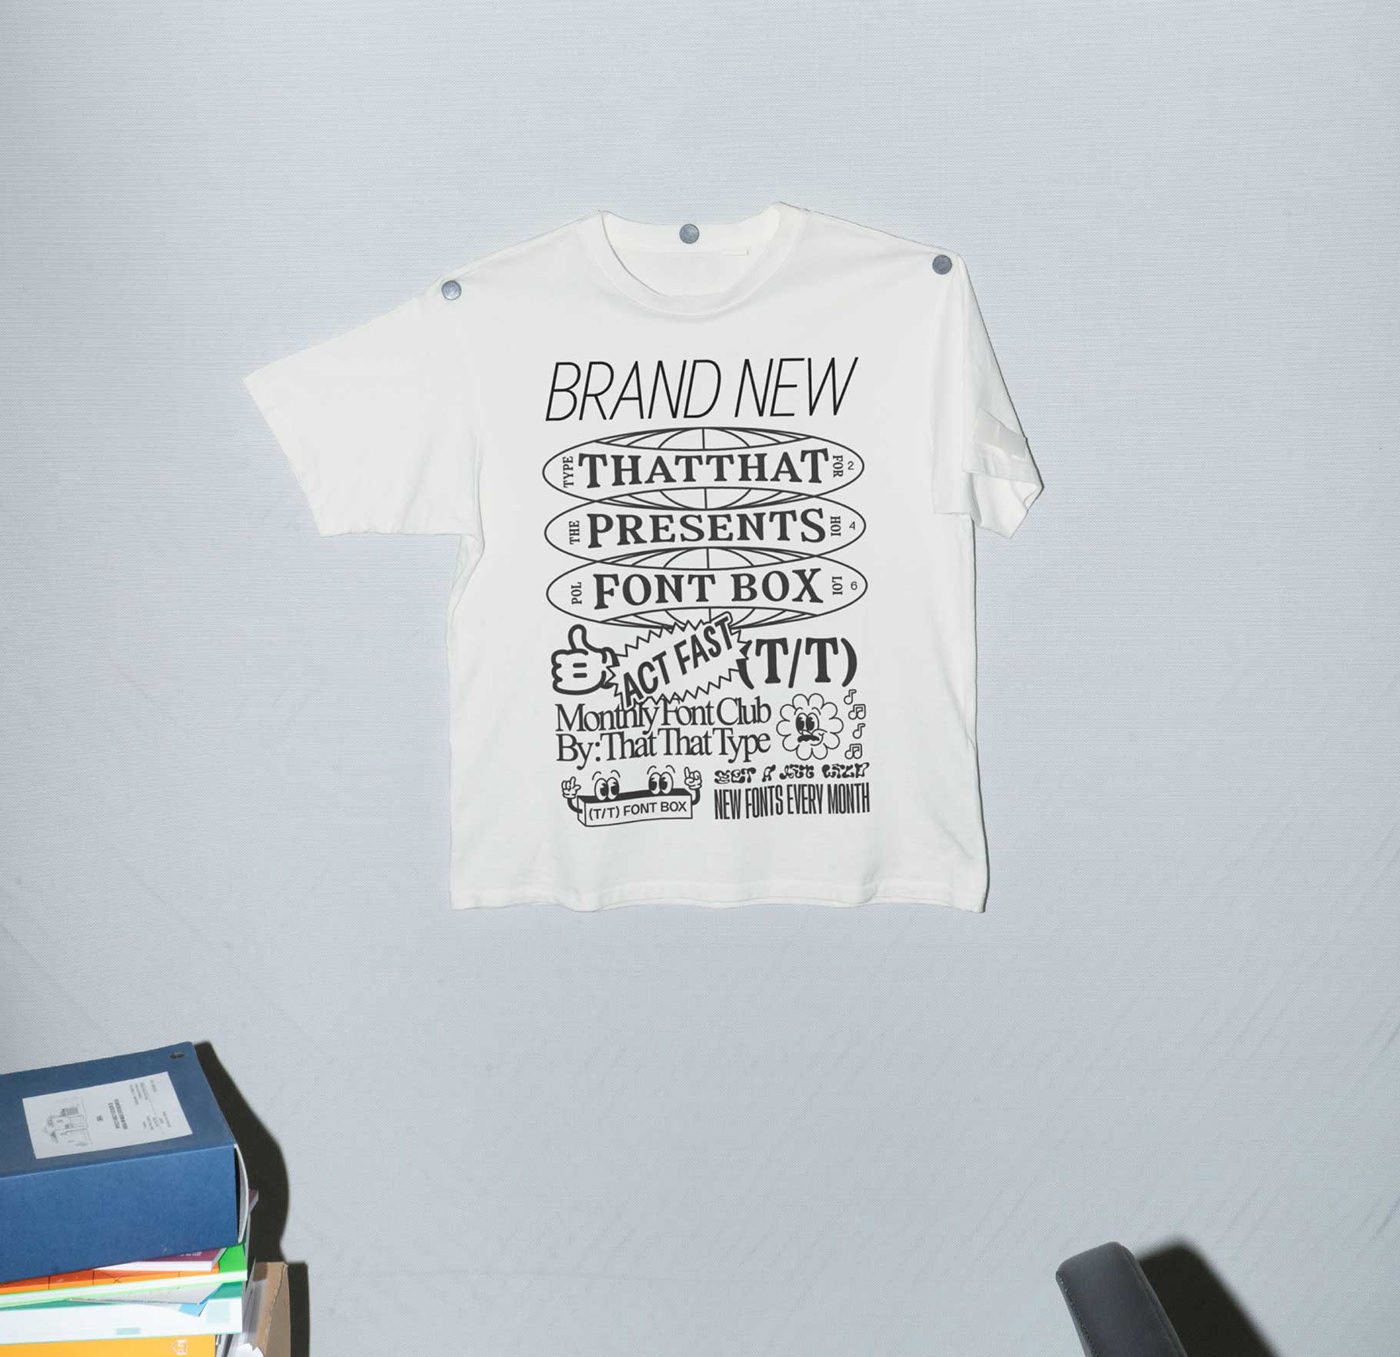 a t shirt with a heavy text graphic pinned up on a wall